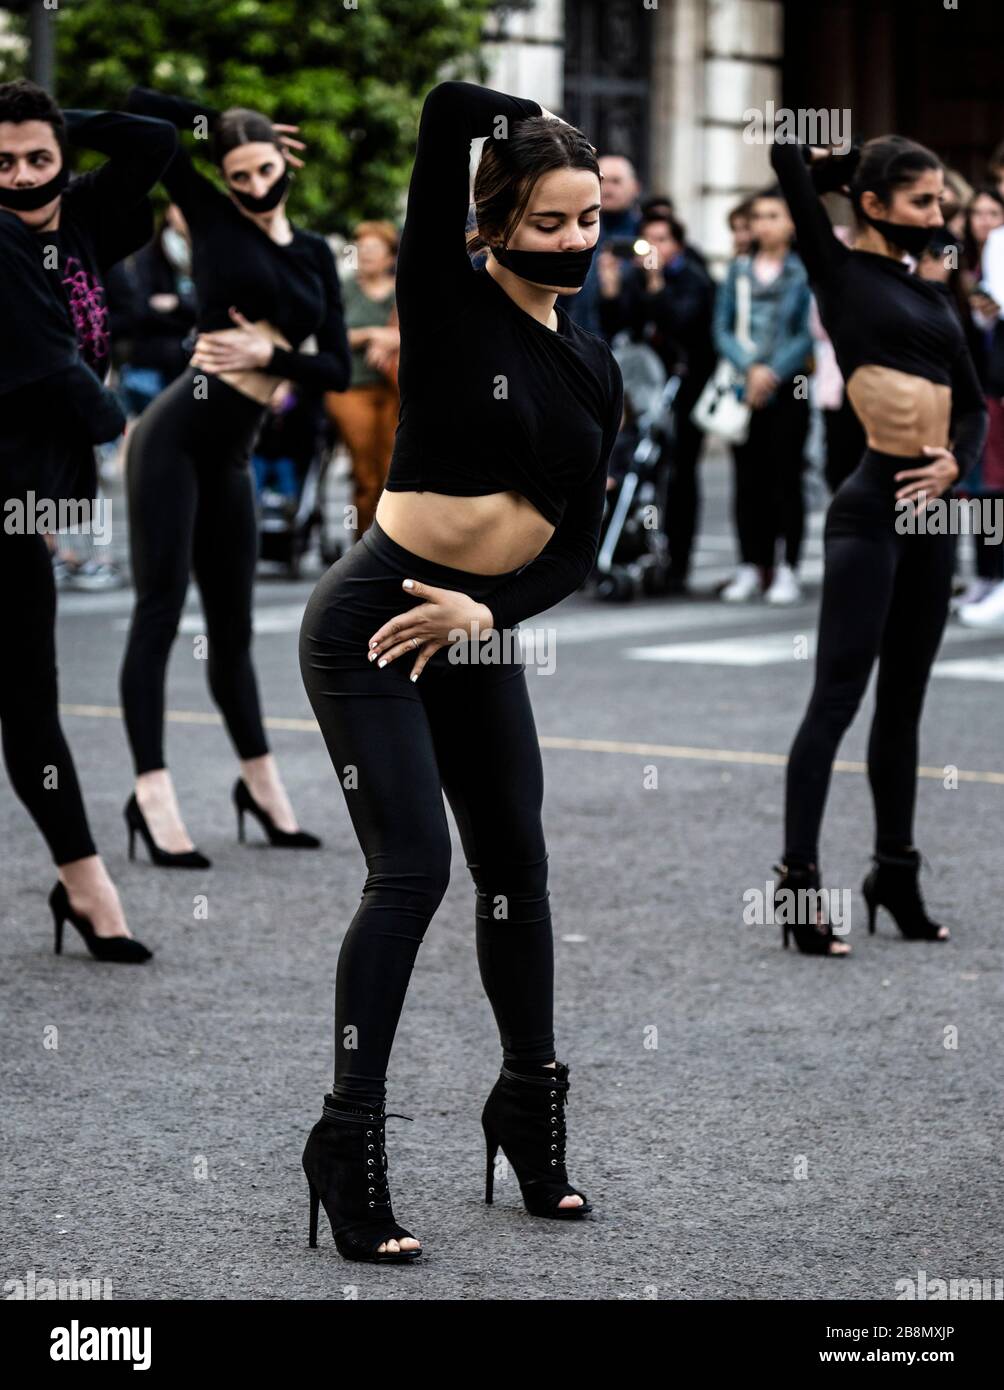 Dance troupe dressed in black wearing face masks over their mouths, International women's day 2020, Valencia, Spain. Stock Photo